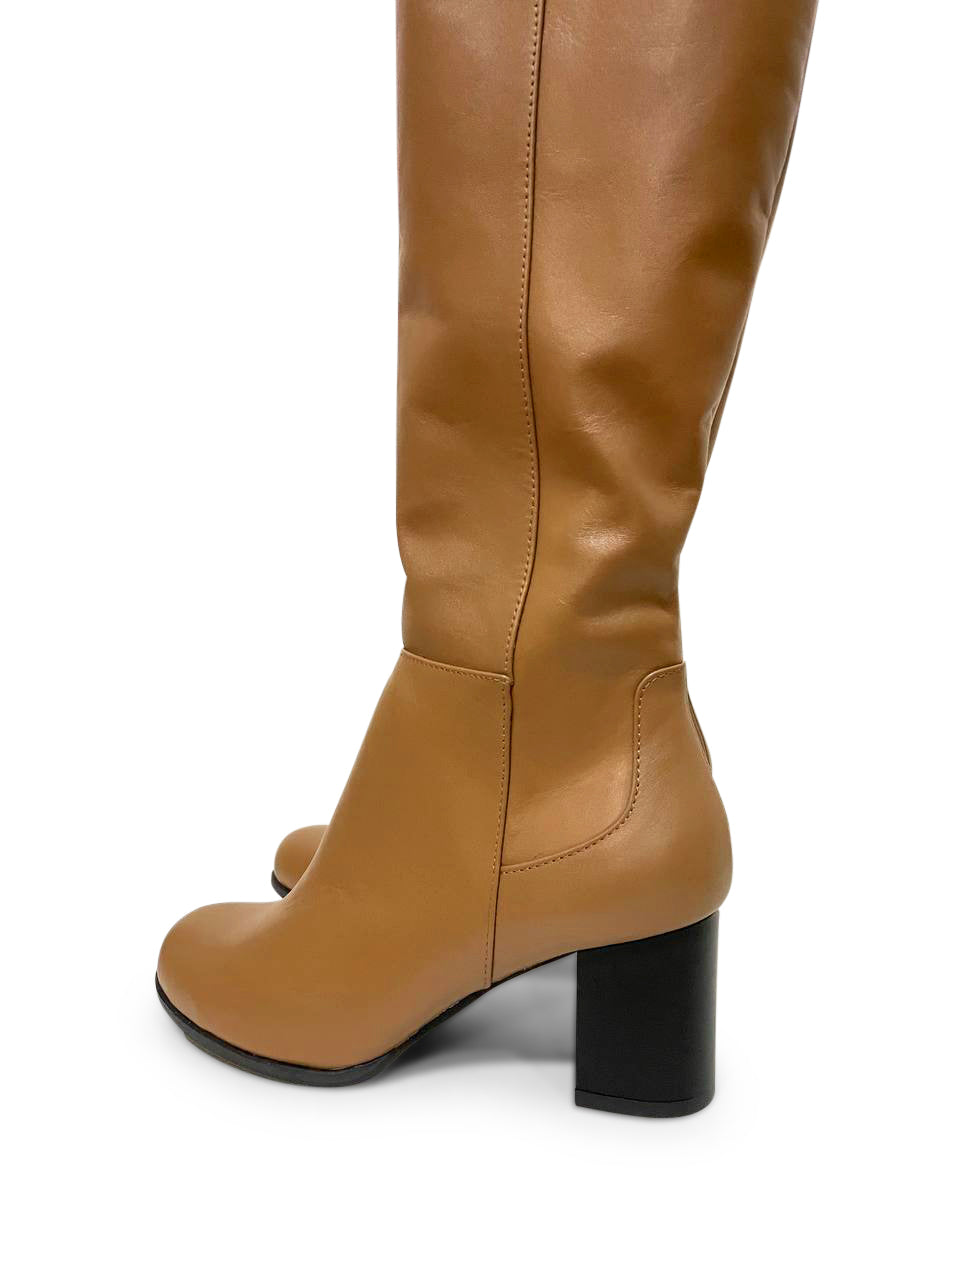 Things High Heeled Boots Brown Leather For Women